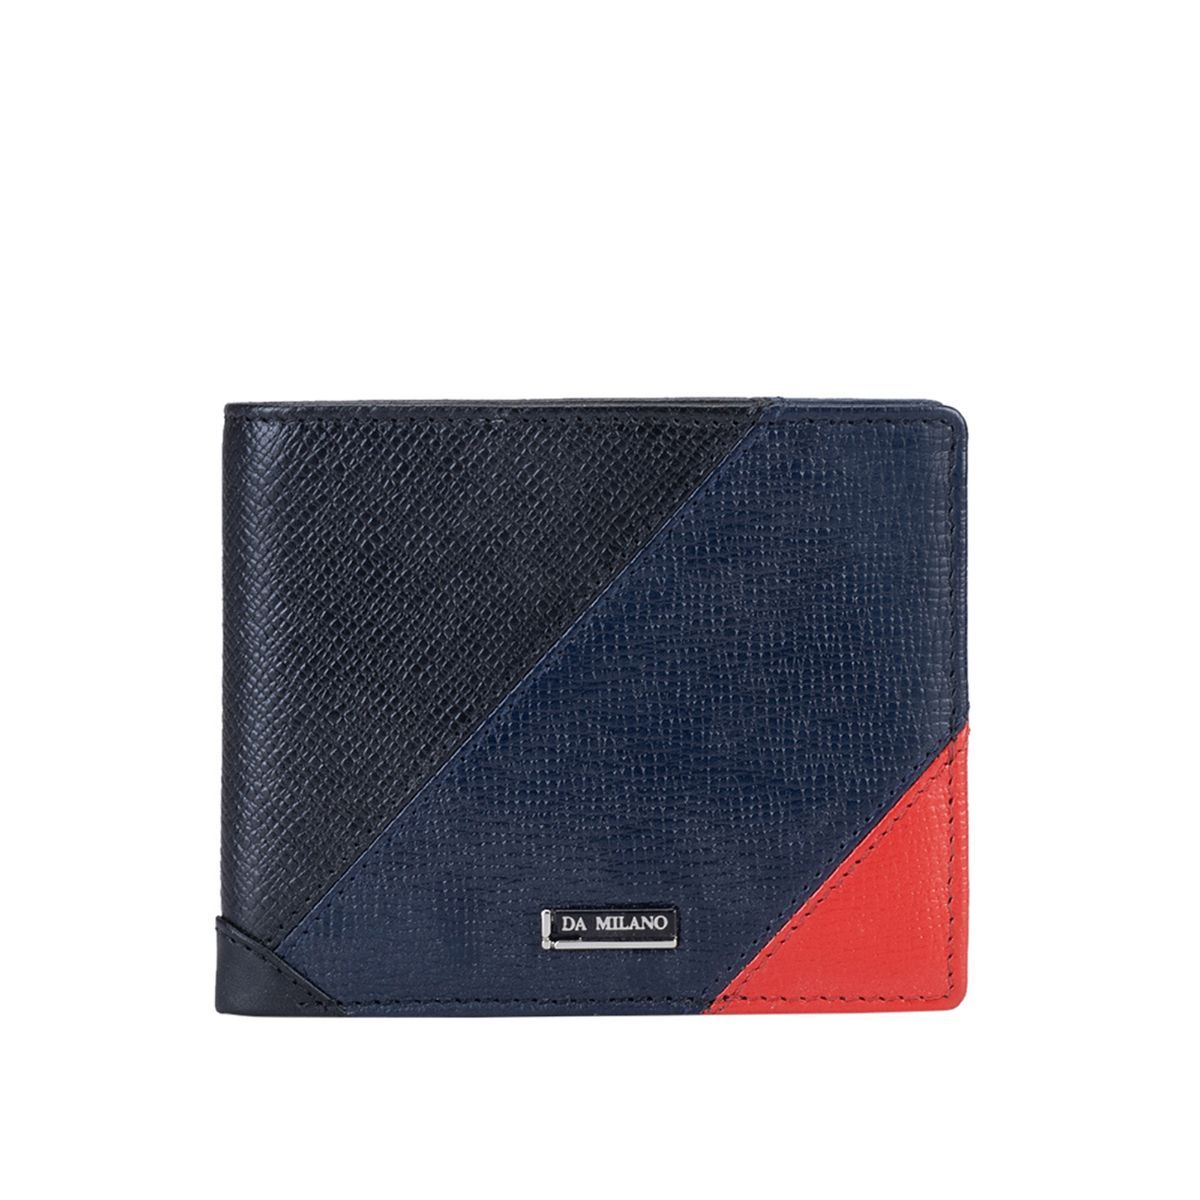 Da Milano Black and Blue Frenzy Leather Mens Wallet